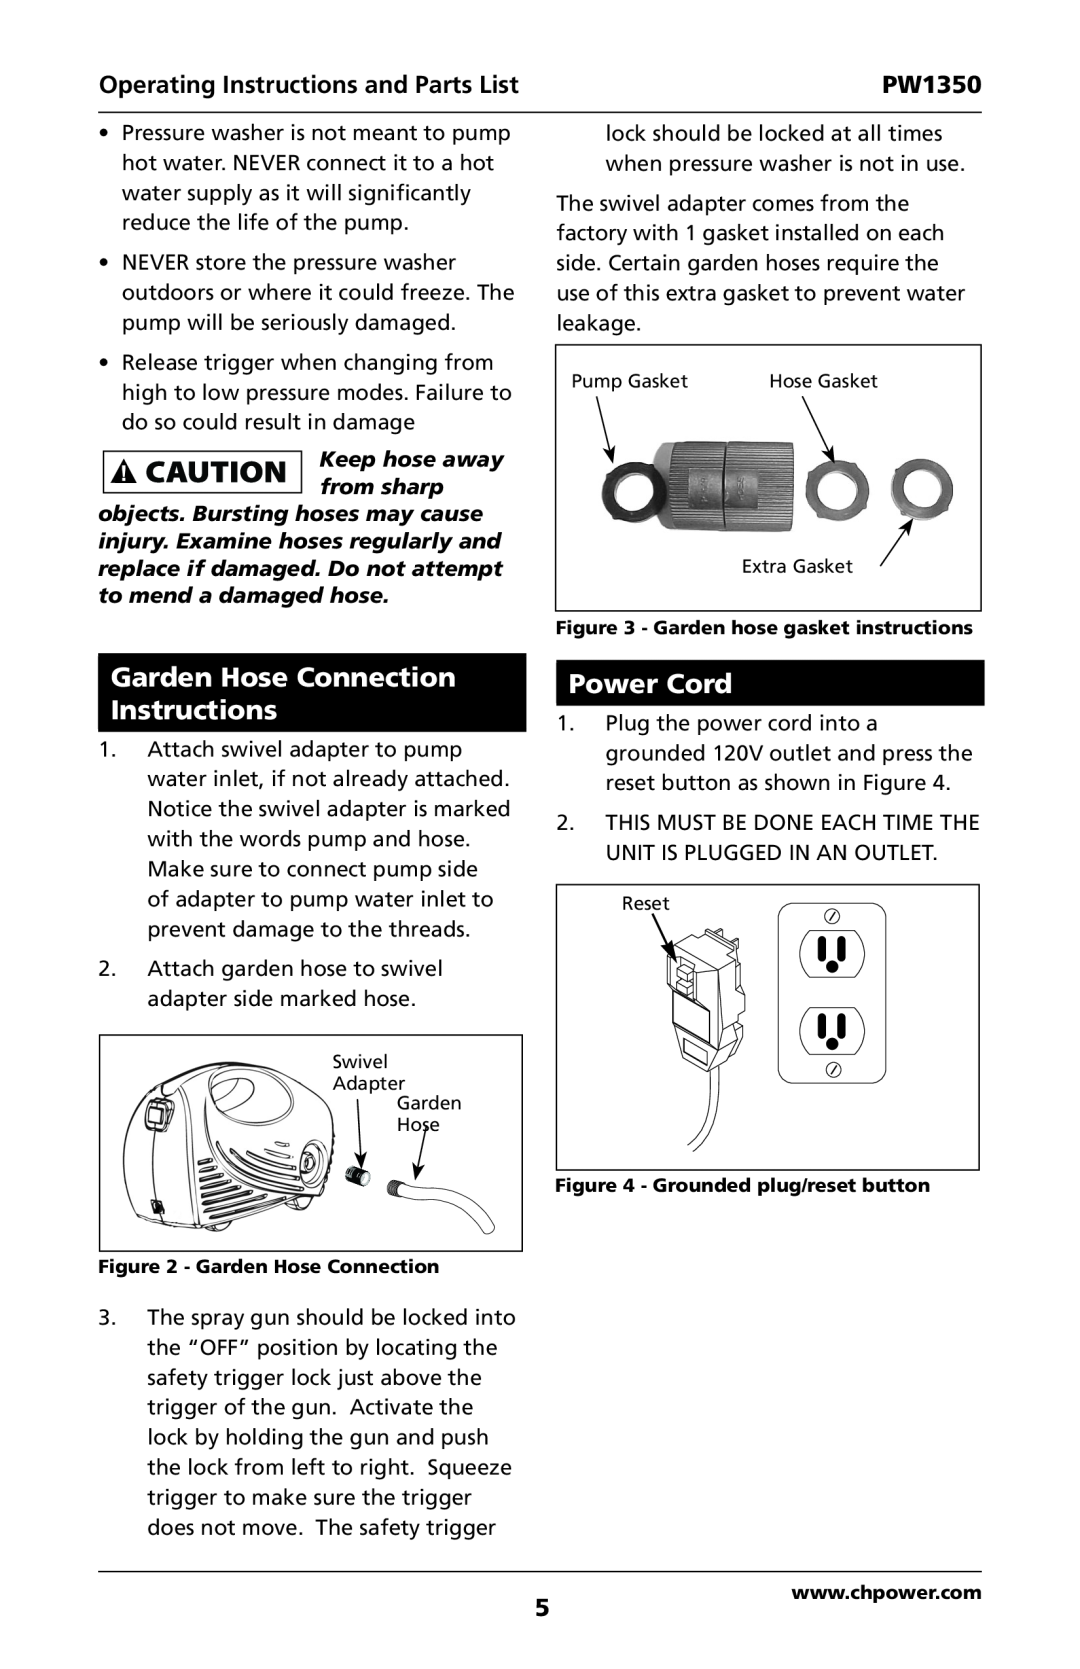 Campbell Hausfeld IN468001AV Garden Hose Connection Instructions, Power Cord, Keep hose away from sharp, PW1350 